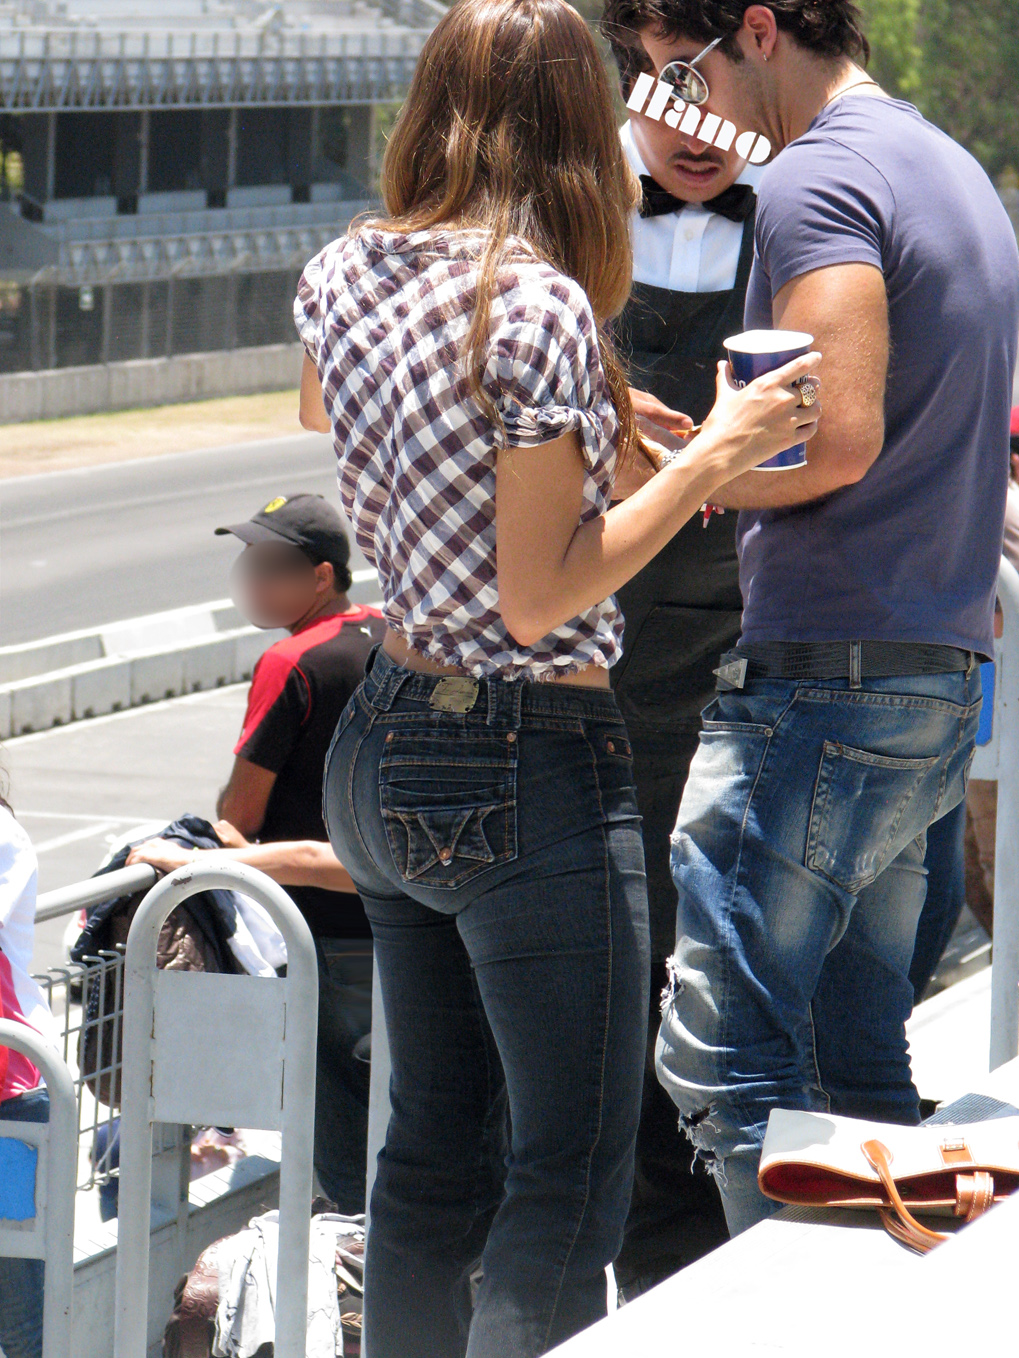 Perfect Round Ass In Jeans Divine Butts Candid Milfs I